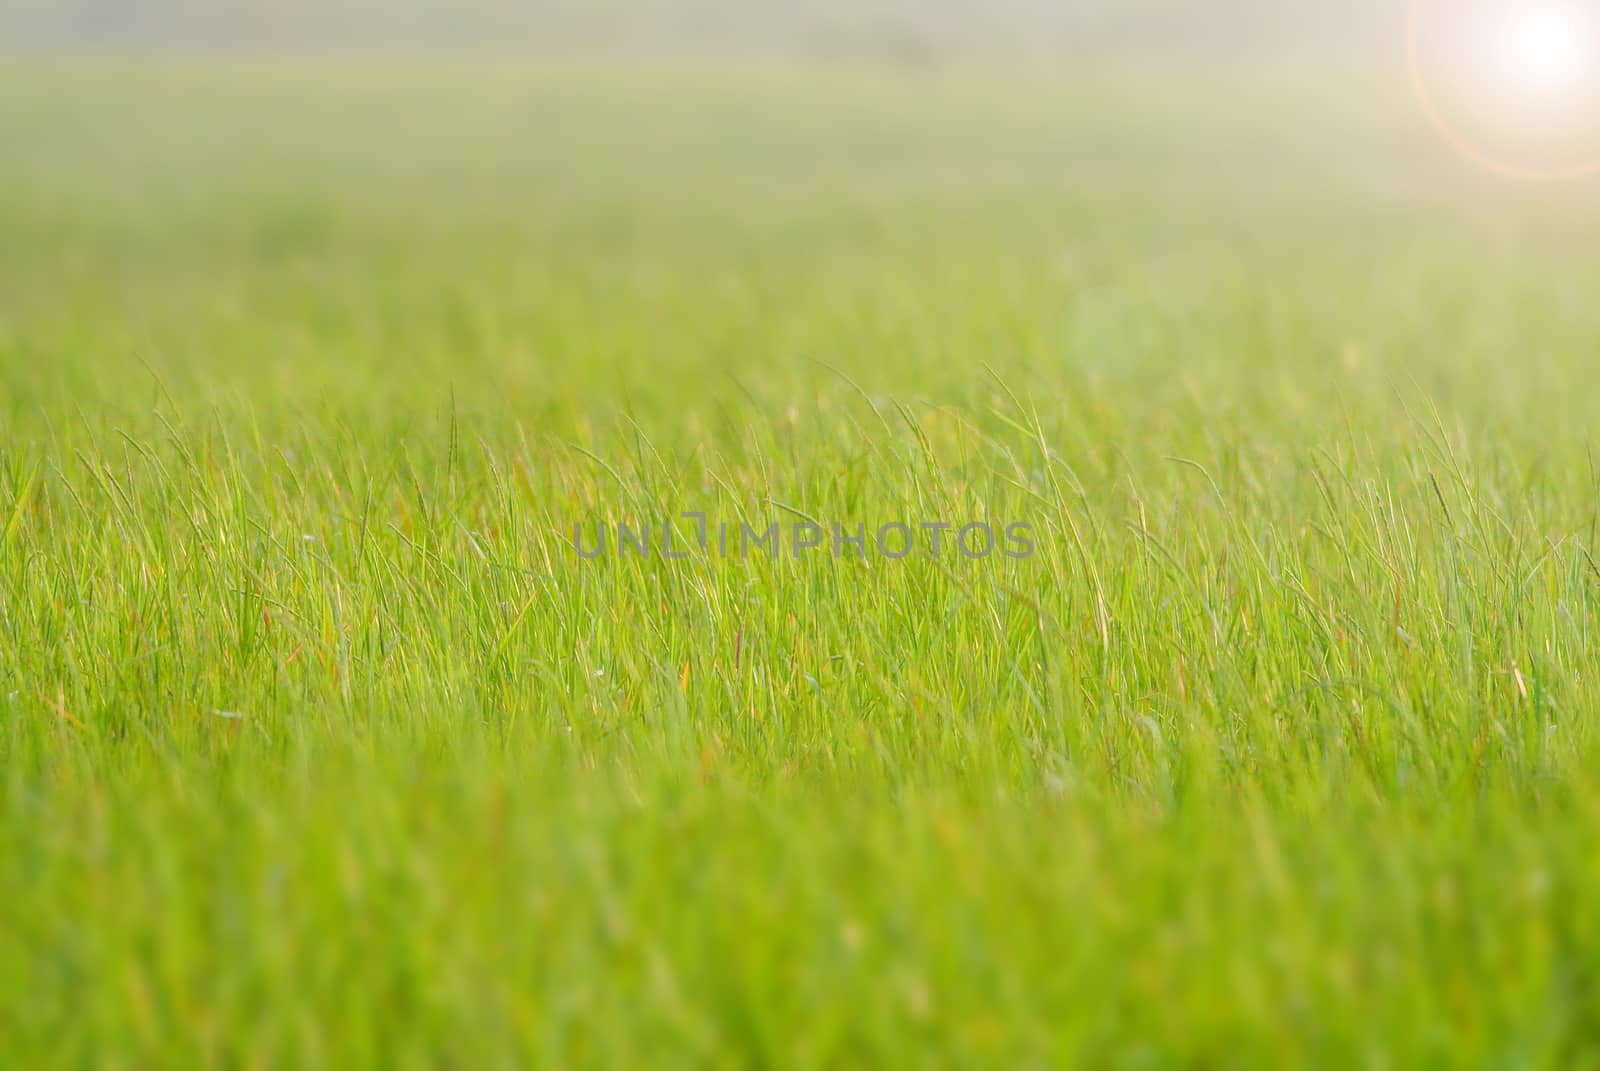 Blurry grass on a background of a field by yuiyuize